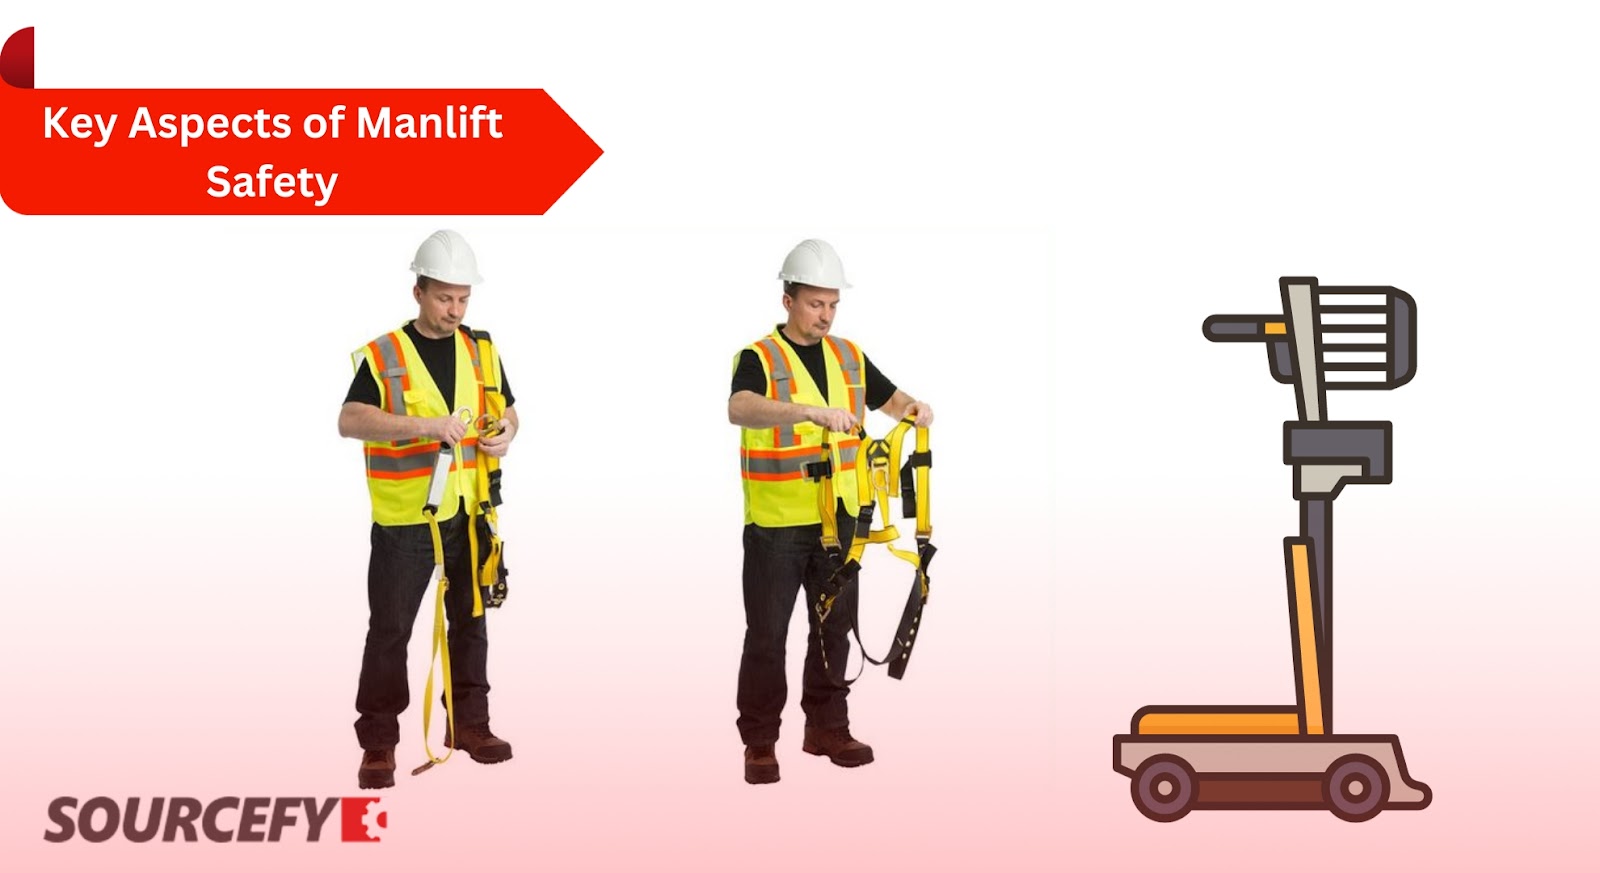 Key Aspects of Manlift Safety